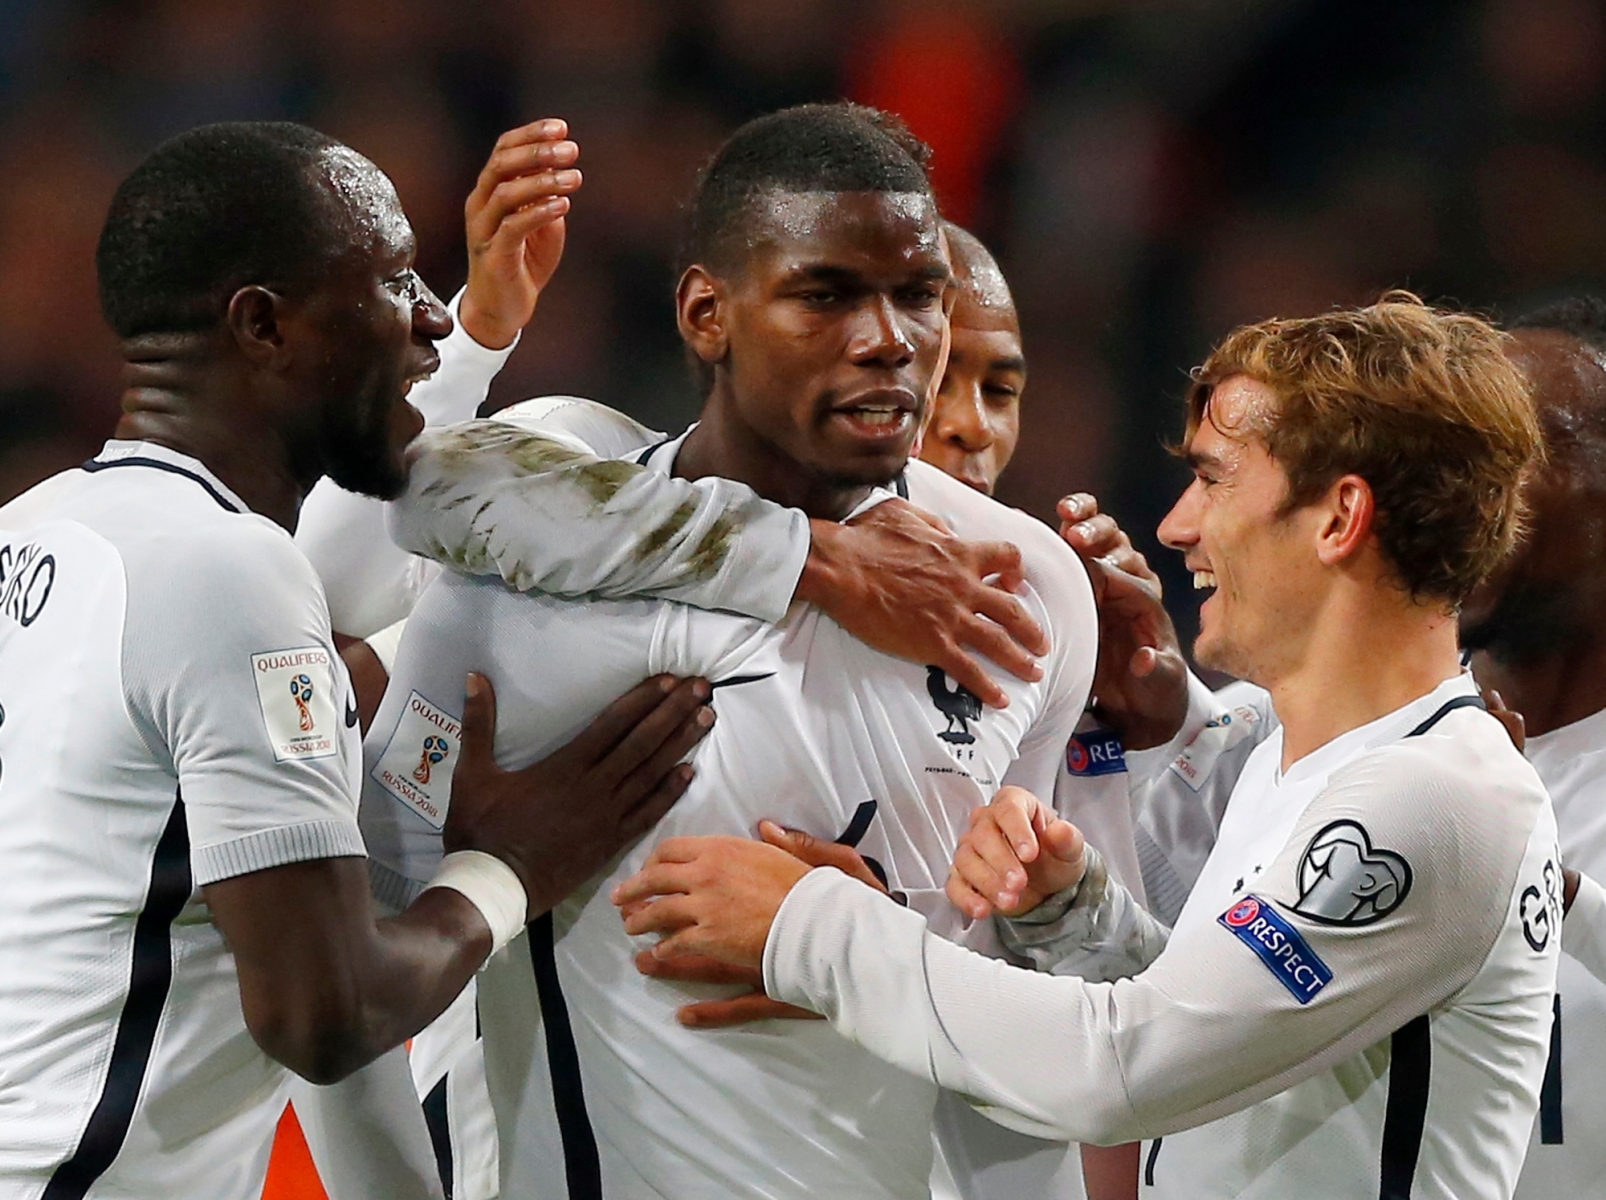 France's Paul Pogba, center, is congratulated by teammates after scoring the opening goal during the World Cup Group A qualifying soccer match in the ArenA stadium in Amsterdam, Netherlands, Monday, Oct. 10, 2016. (AP Photo/Peter Dejong)  Soccer WCup 2018 Netherlands France